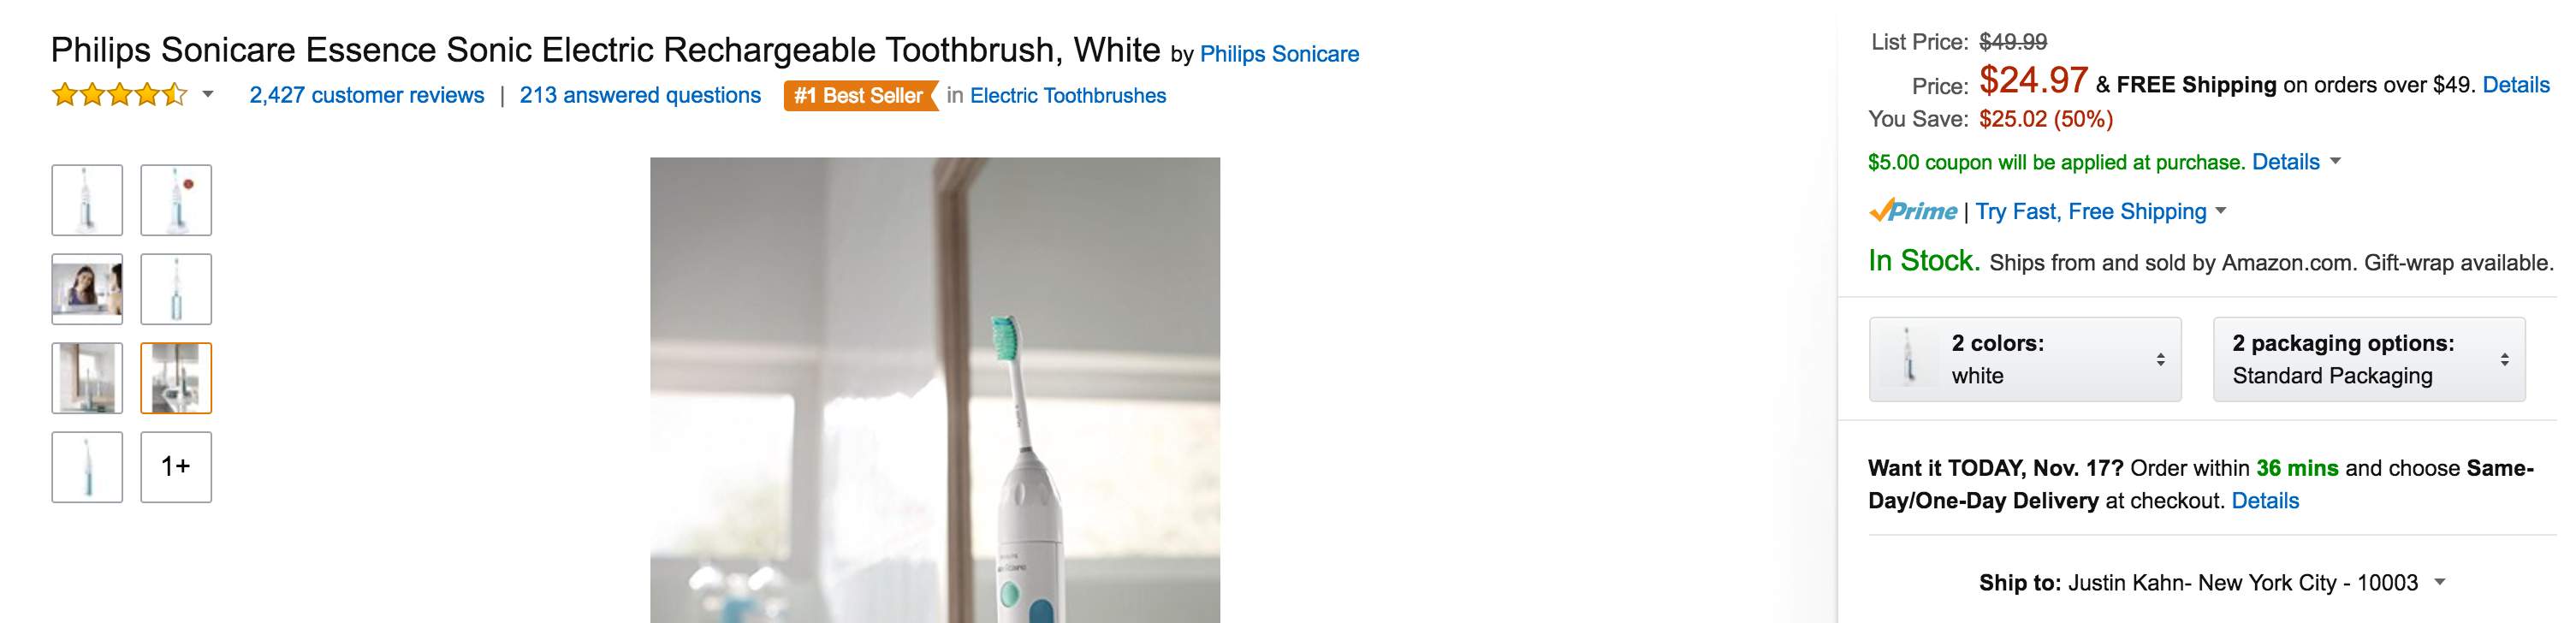 philips-sonicare-toothbrush-sale-03